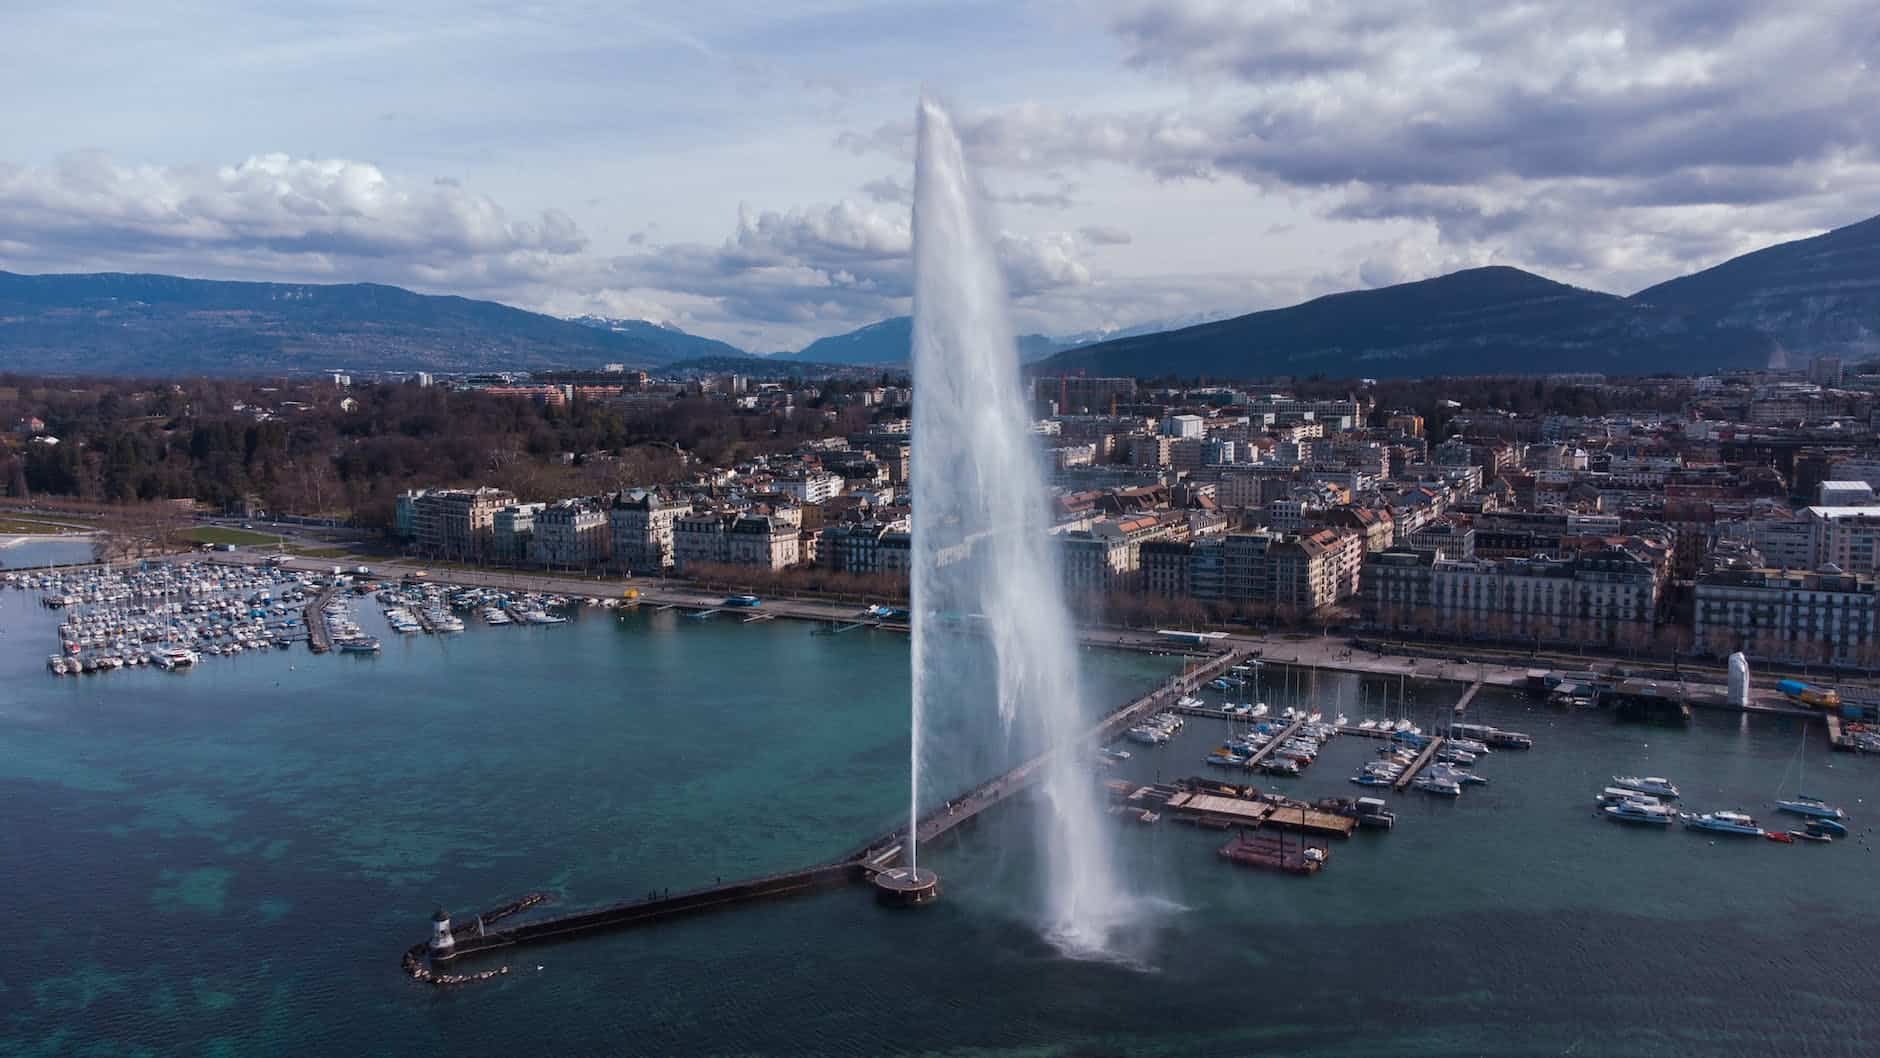 Geneva to vote on turbo taxing the wealthy